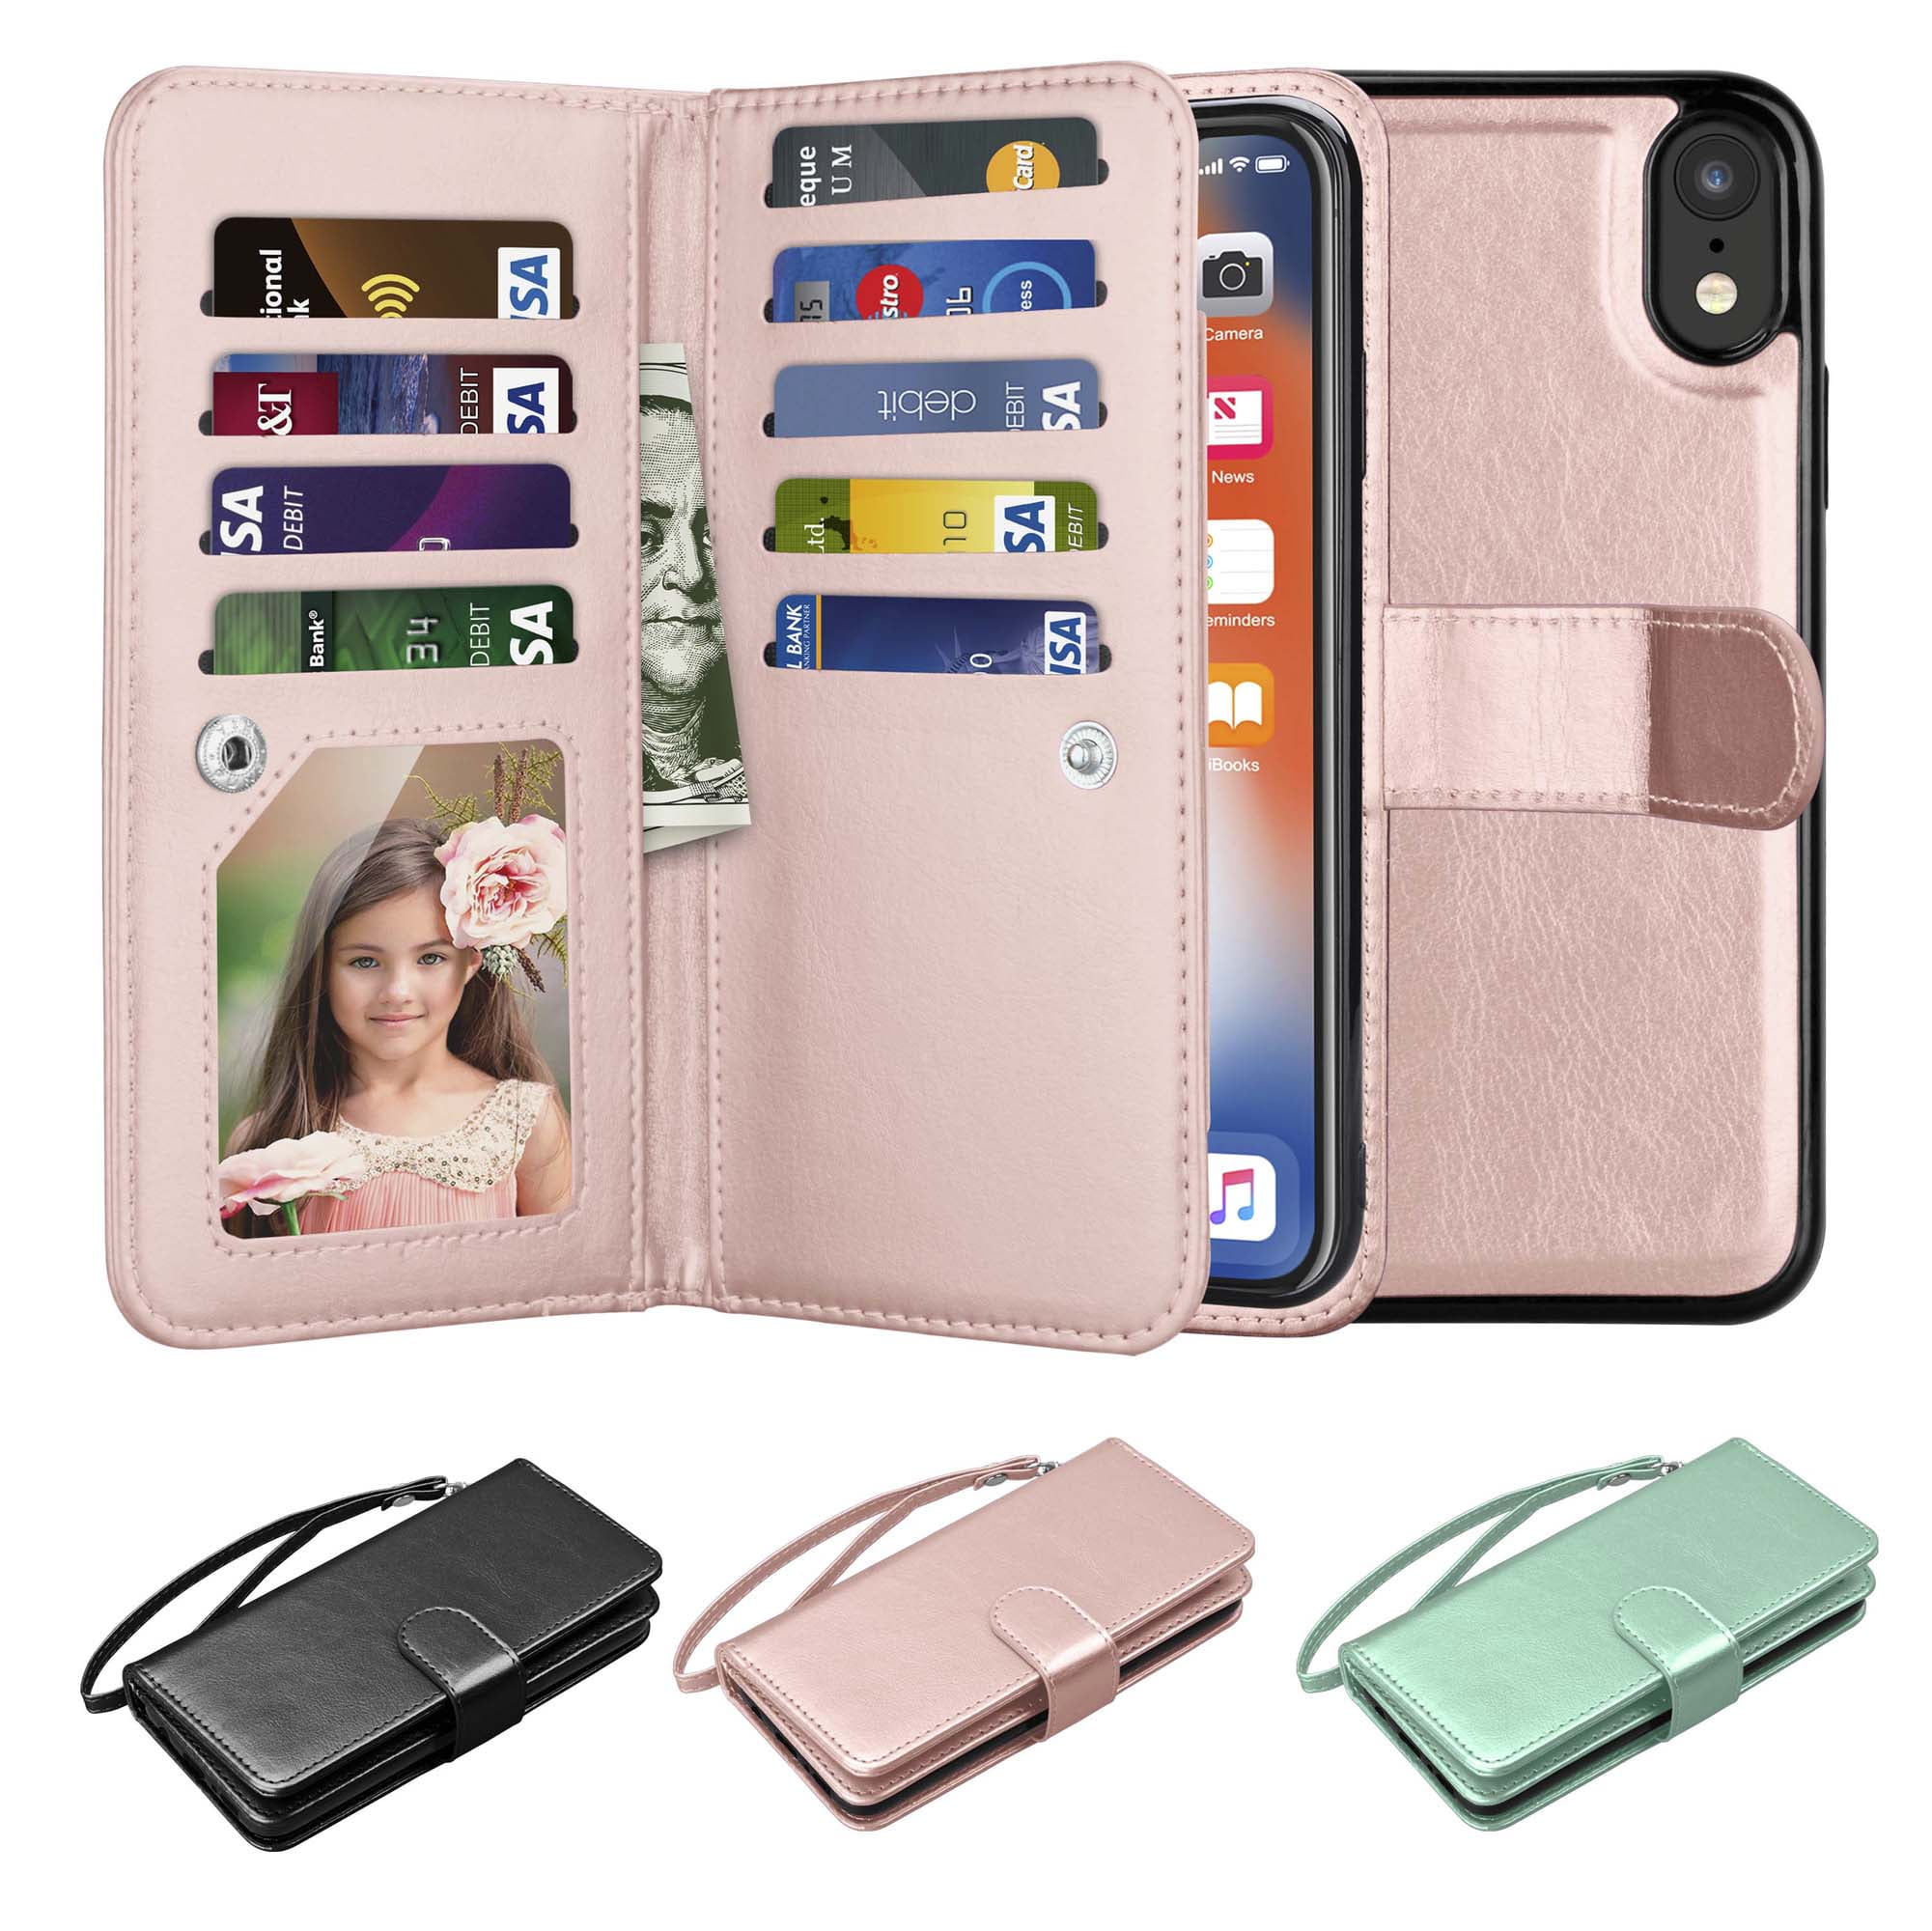 PU Leather Flip Case for iPhone XR Durable Soft Wallet Cover for iPhone XR